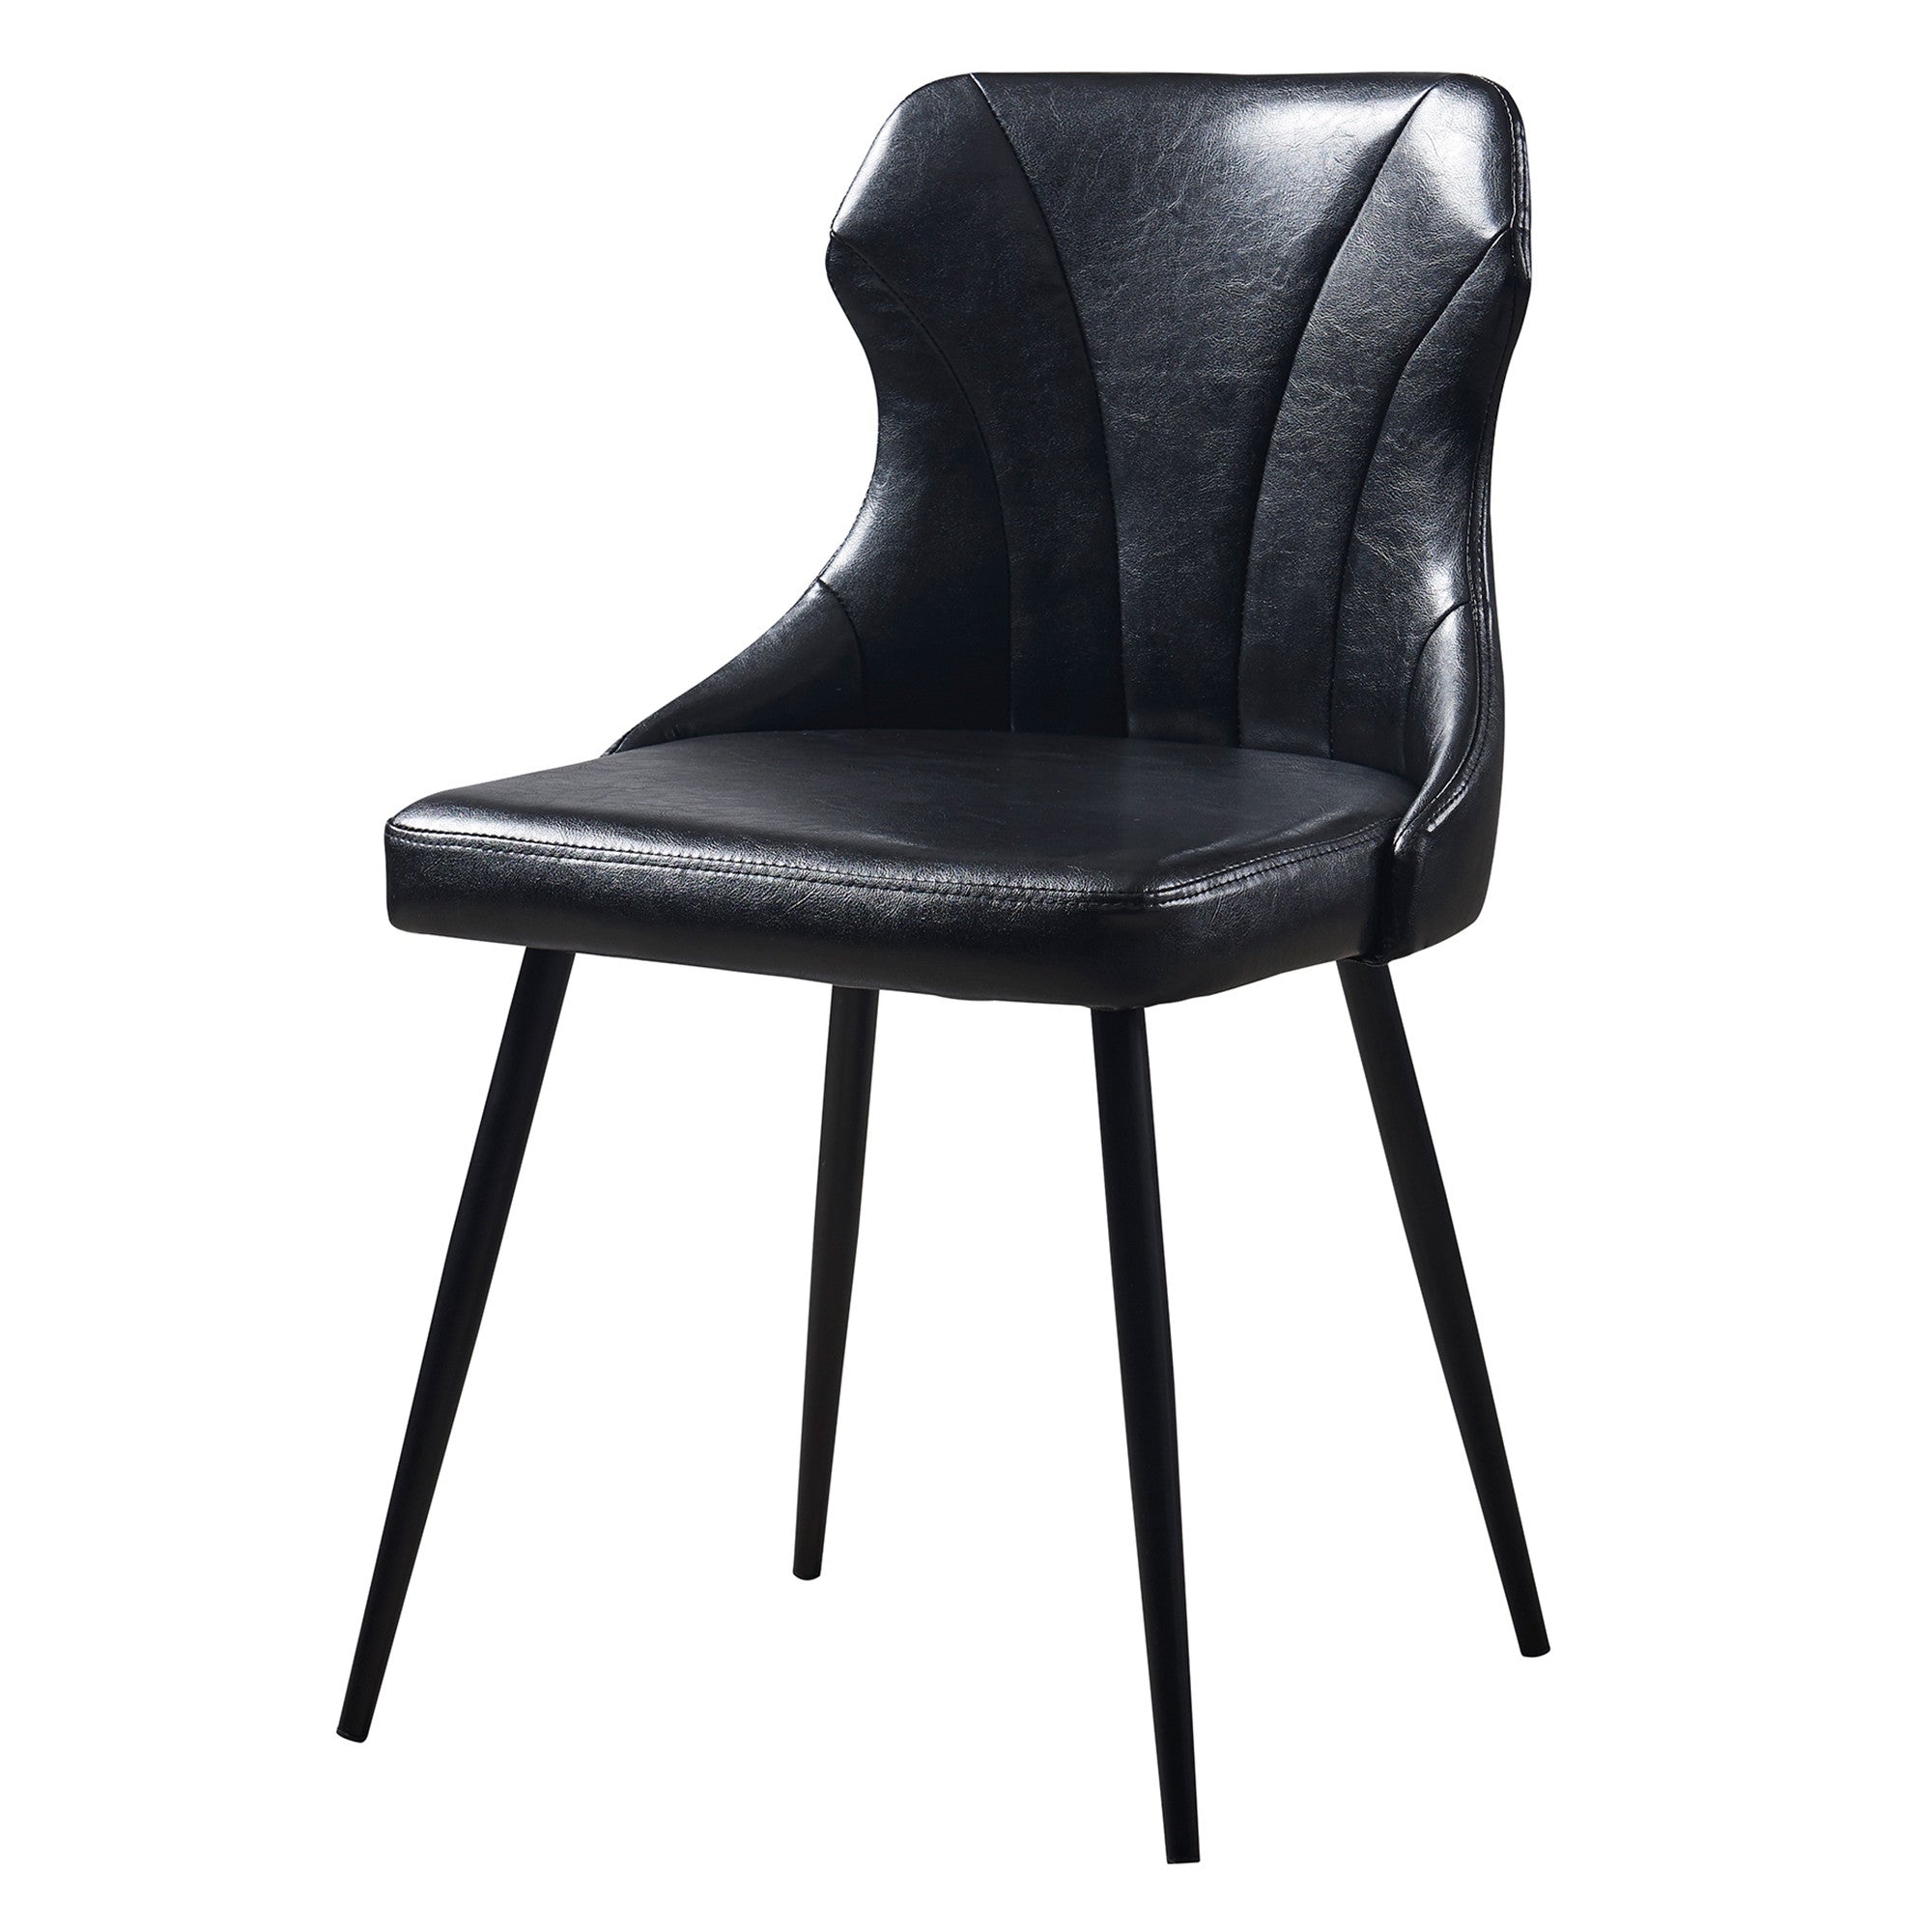 Teamson Home Finley Dining Chair With PU Leather Seat and Metal Legs, Black